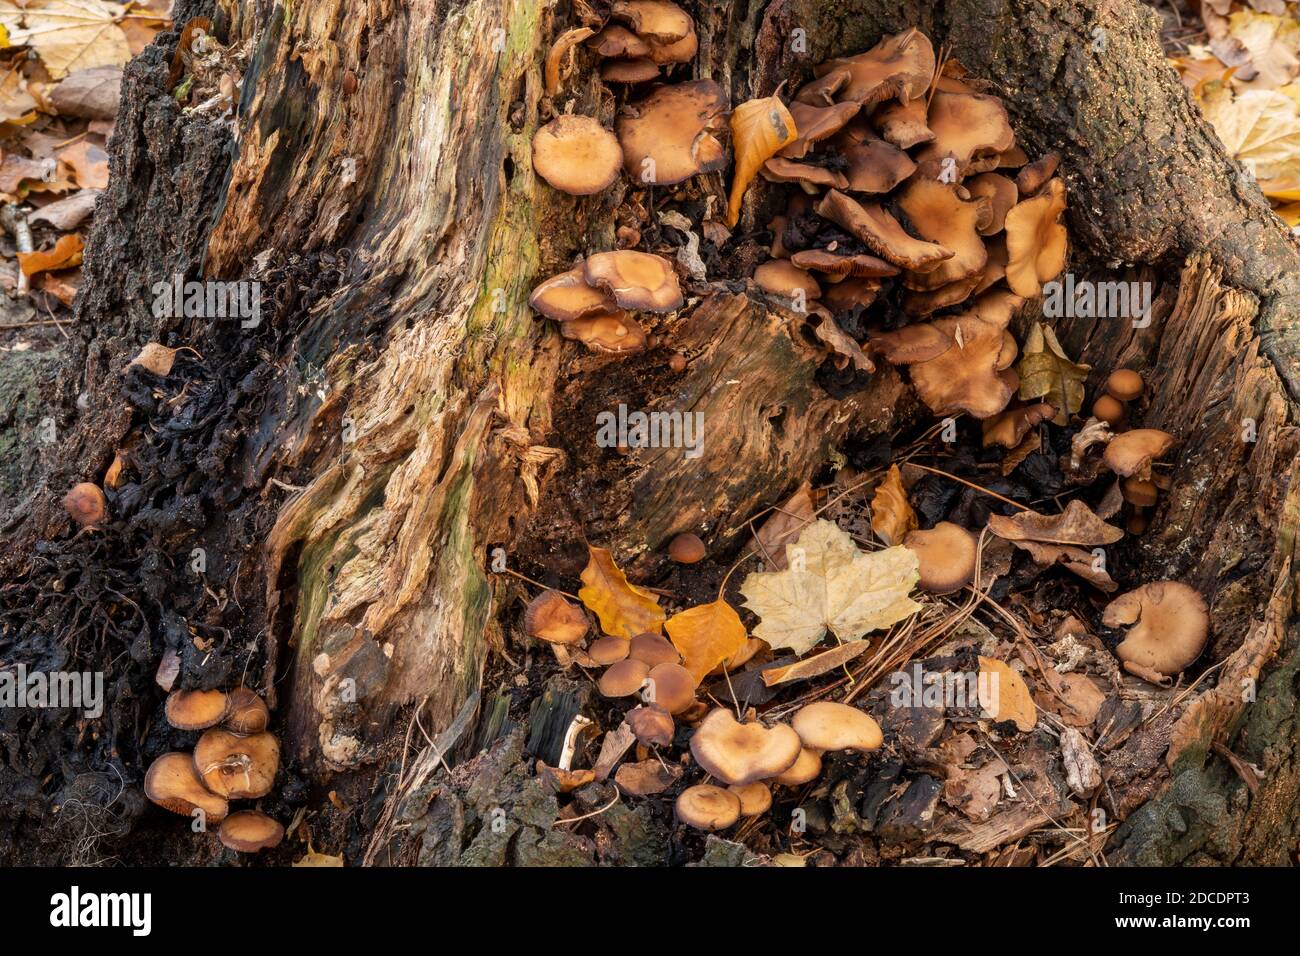 Fungus growth in forest, Suffolk, UK Stock Photo